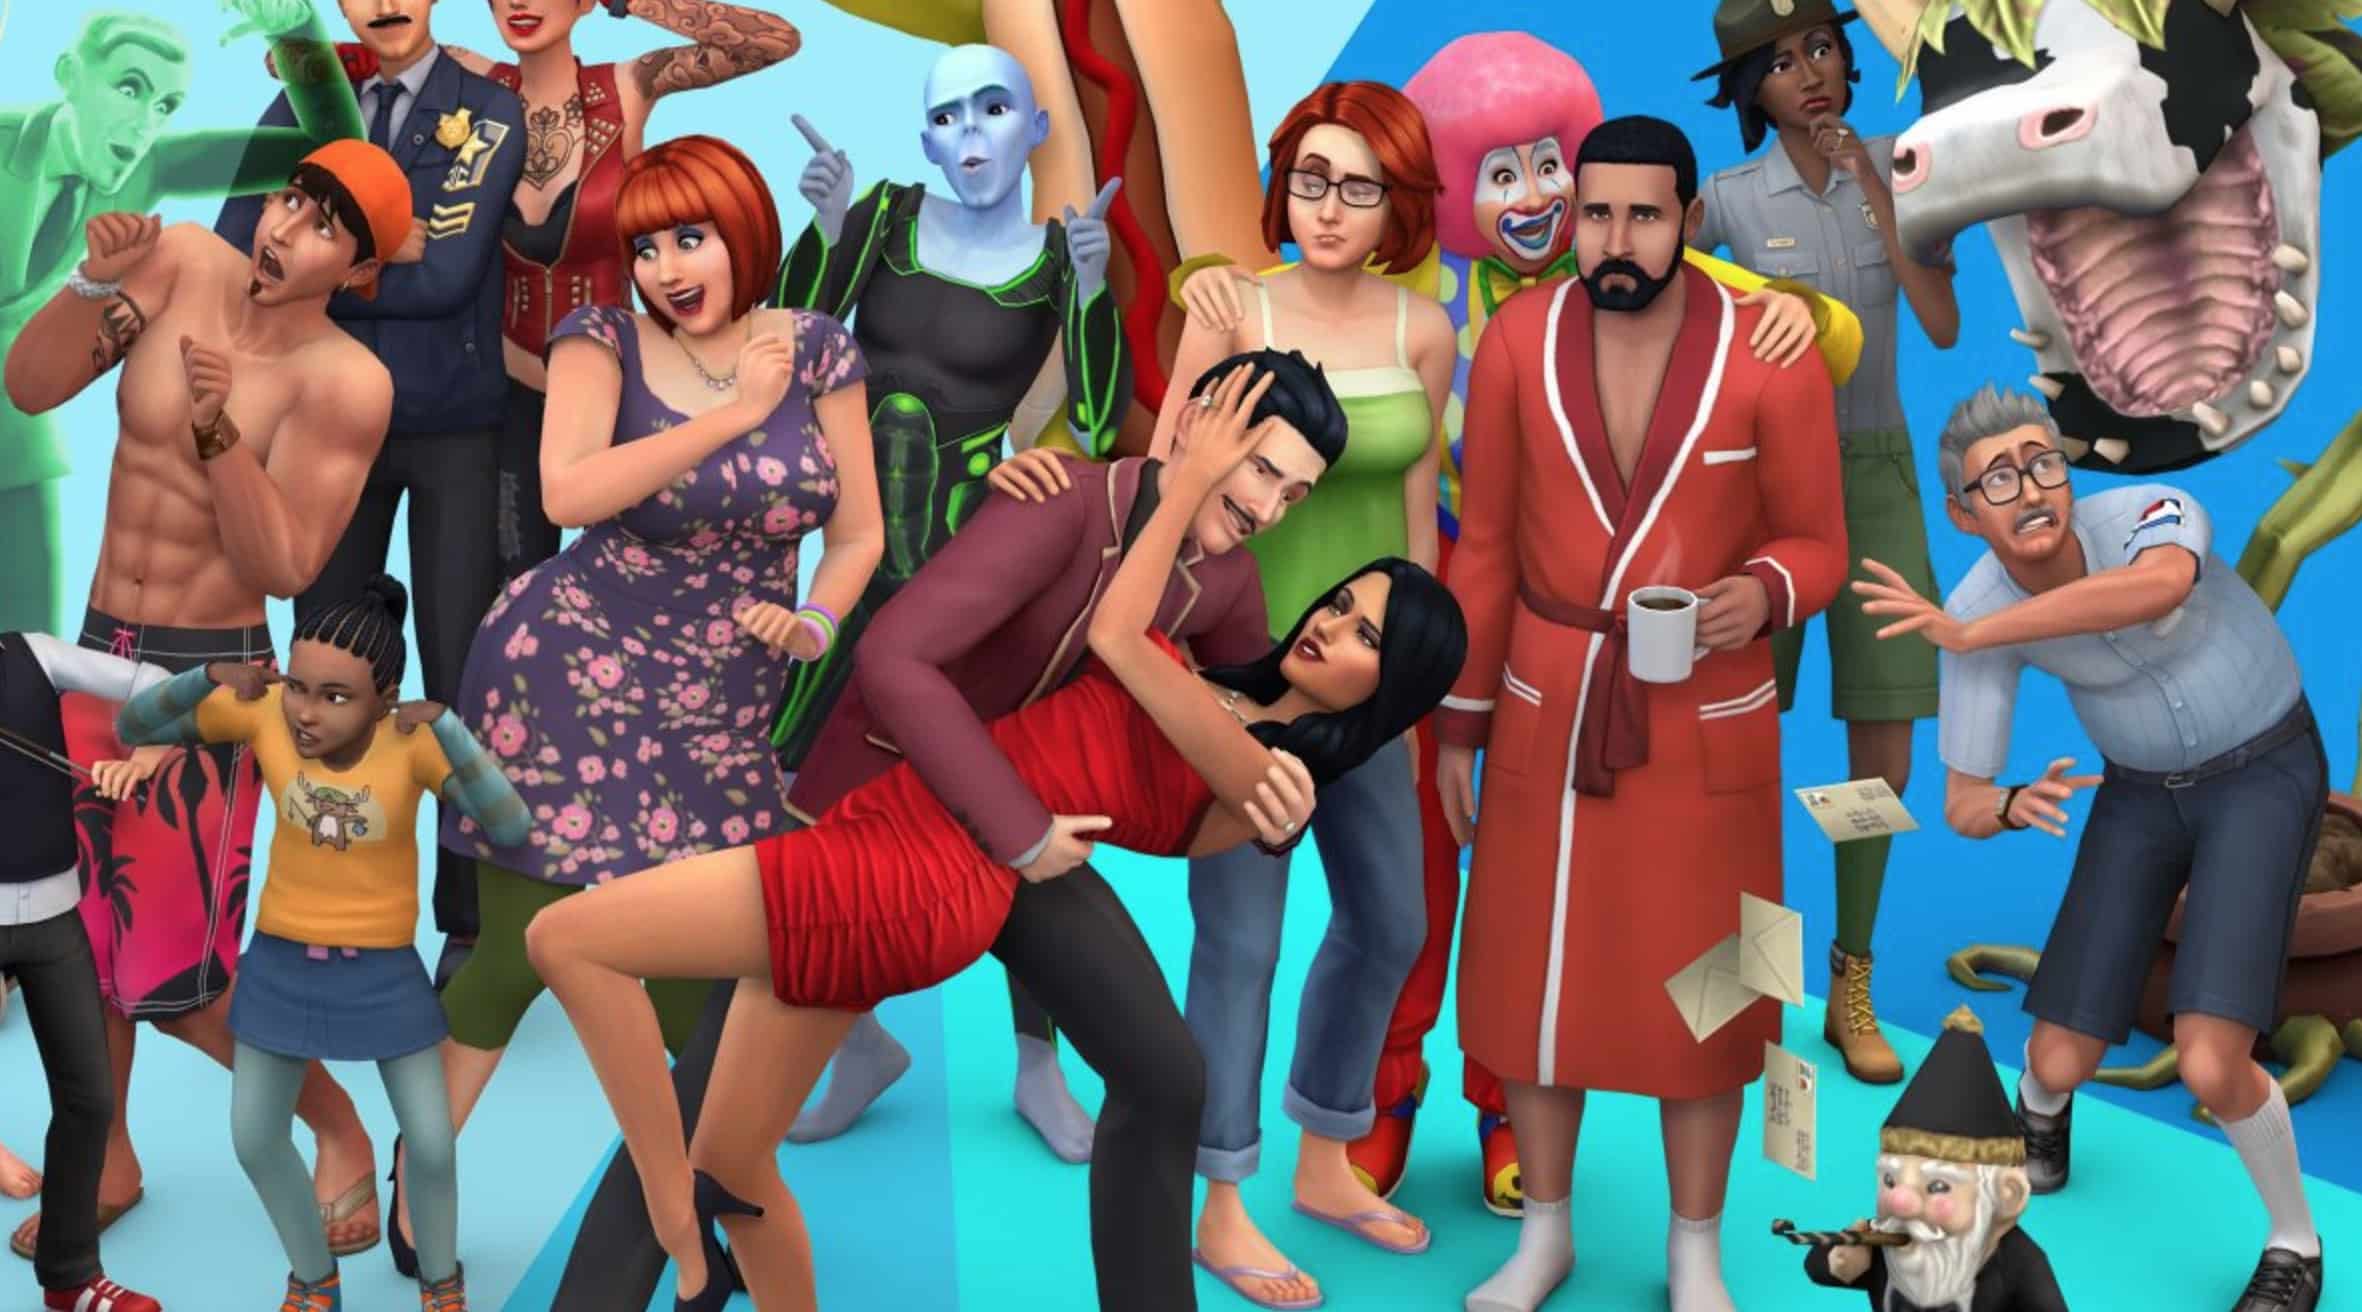 The Sims 4 will be free to play in October - Xfire